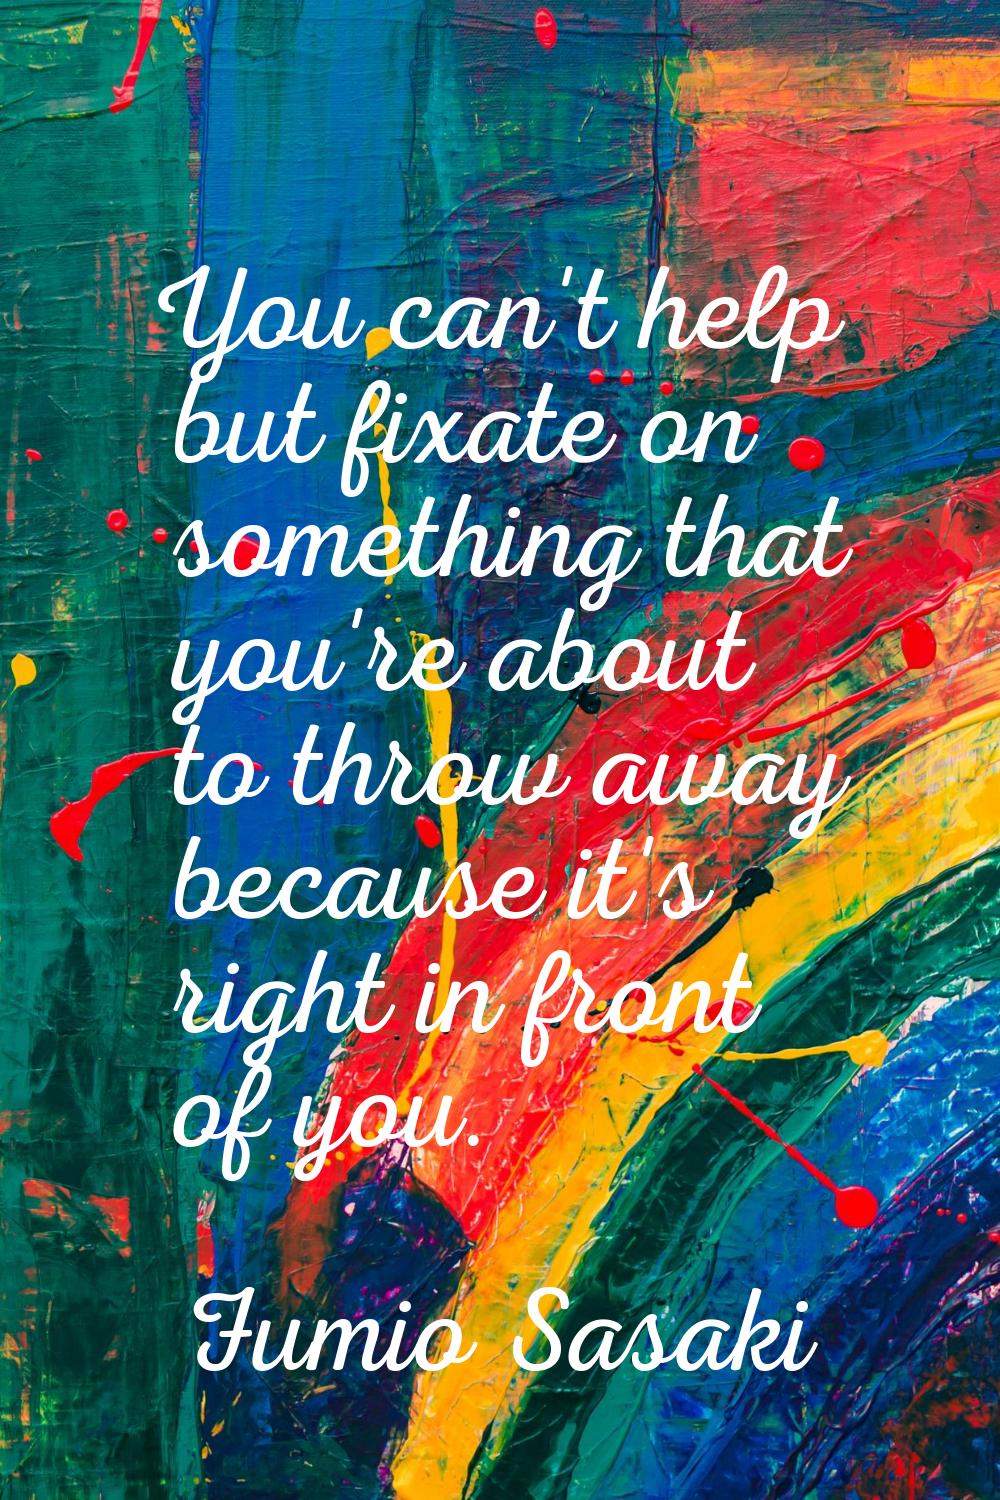 You can't help but fixate on something that you're about to throw away because it's right in front 